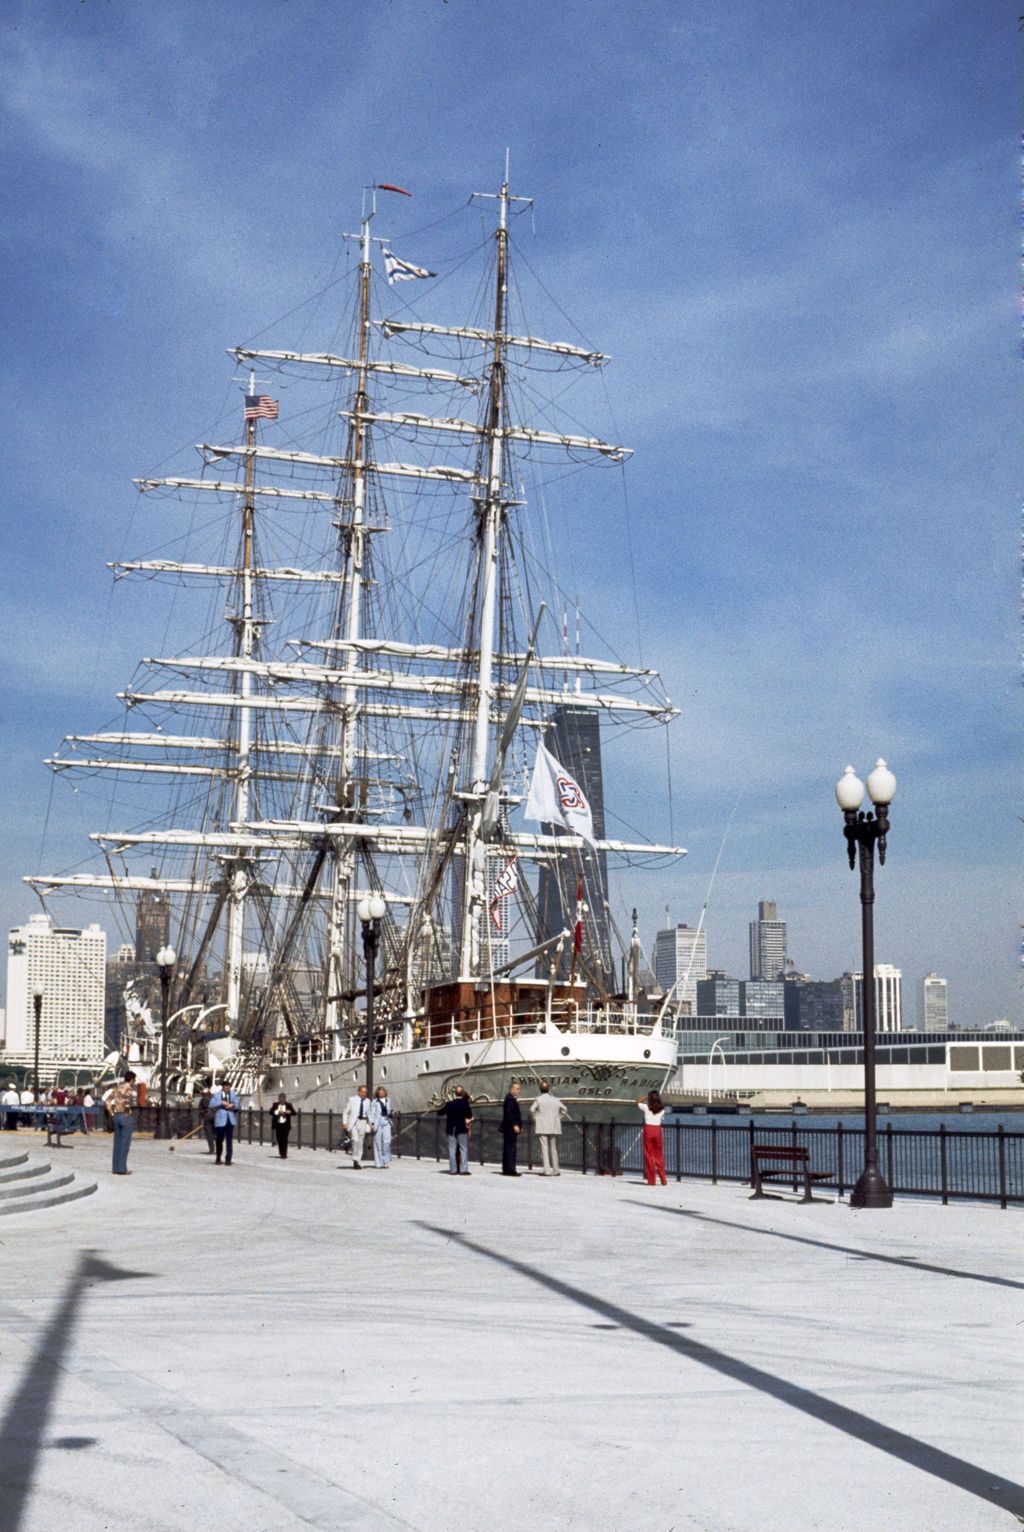 Miniature of The Christian Radich docked at Navy Pier